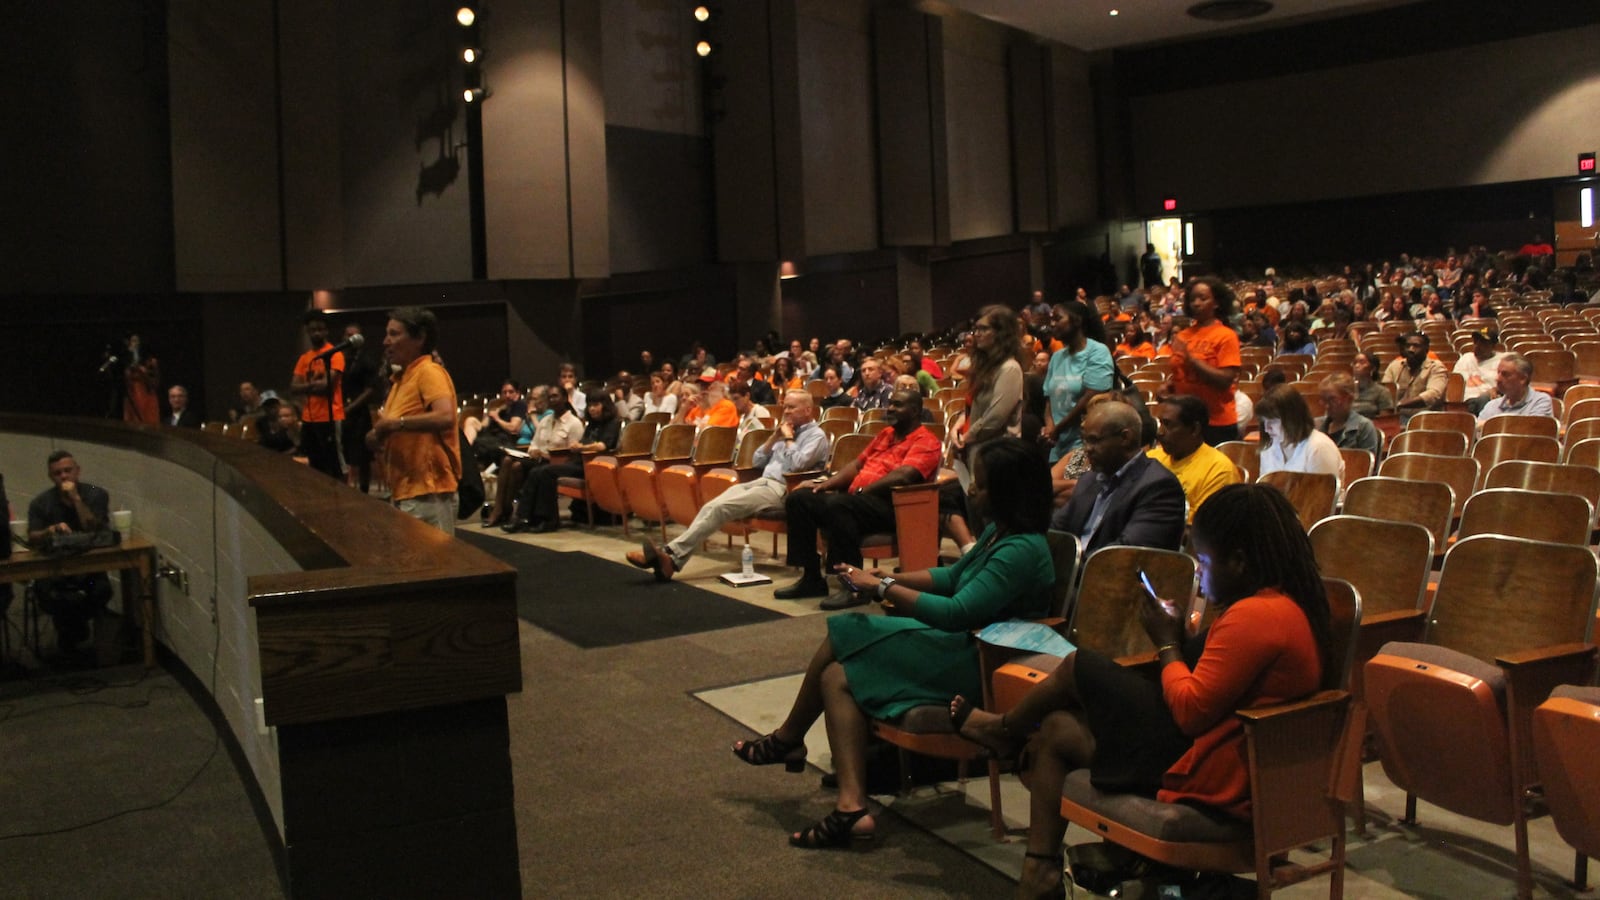 Hundreds of people gathered in the Broad Ripple High School auditorium Tuesday night.